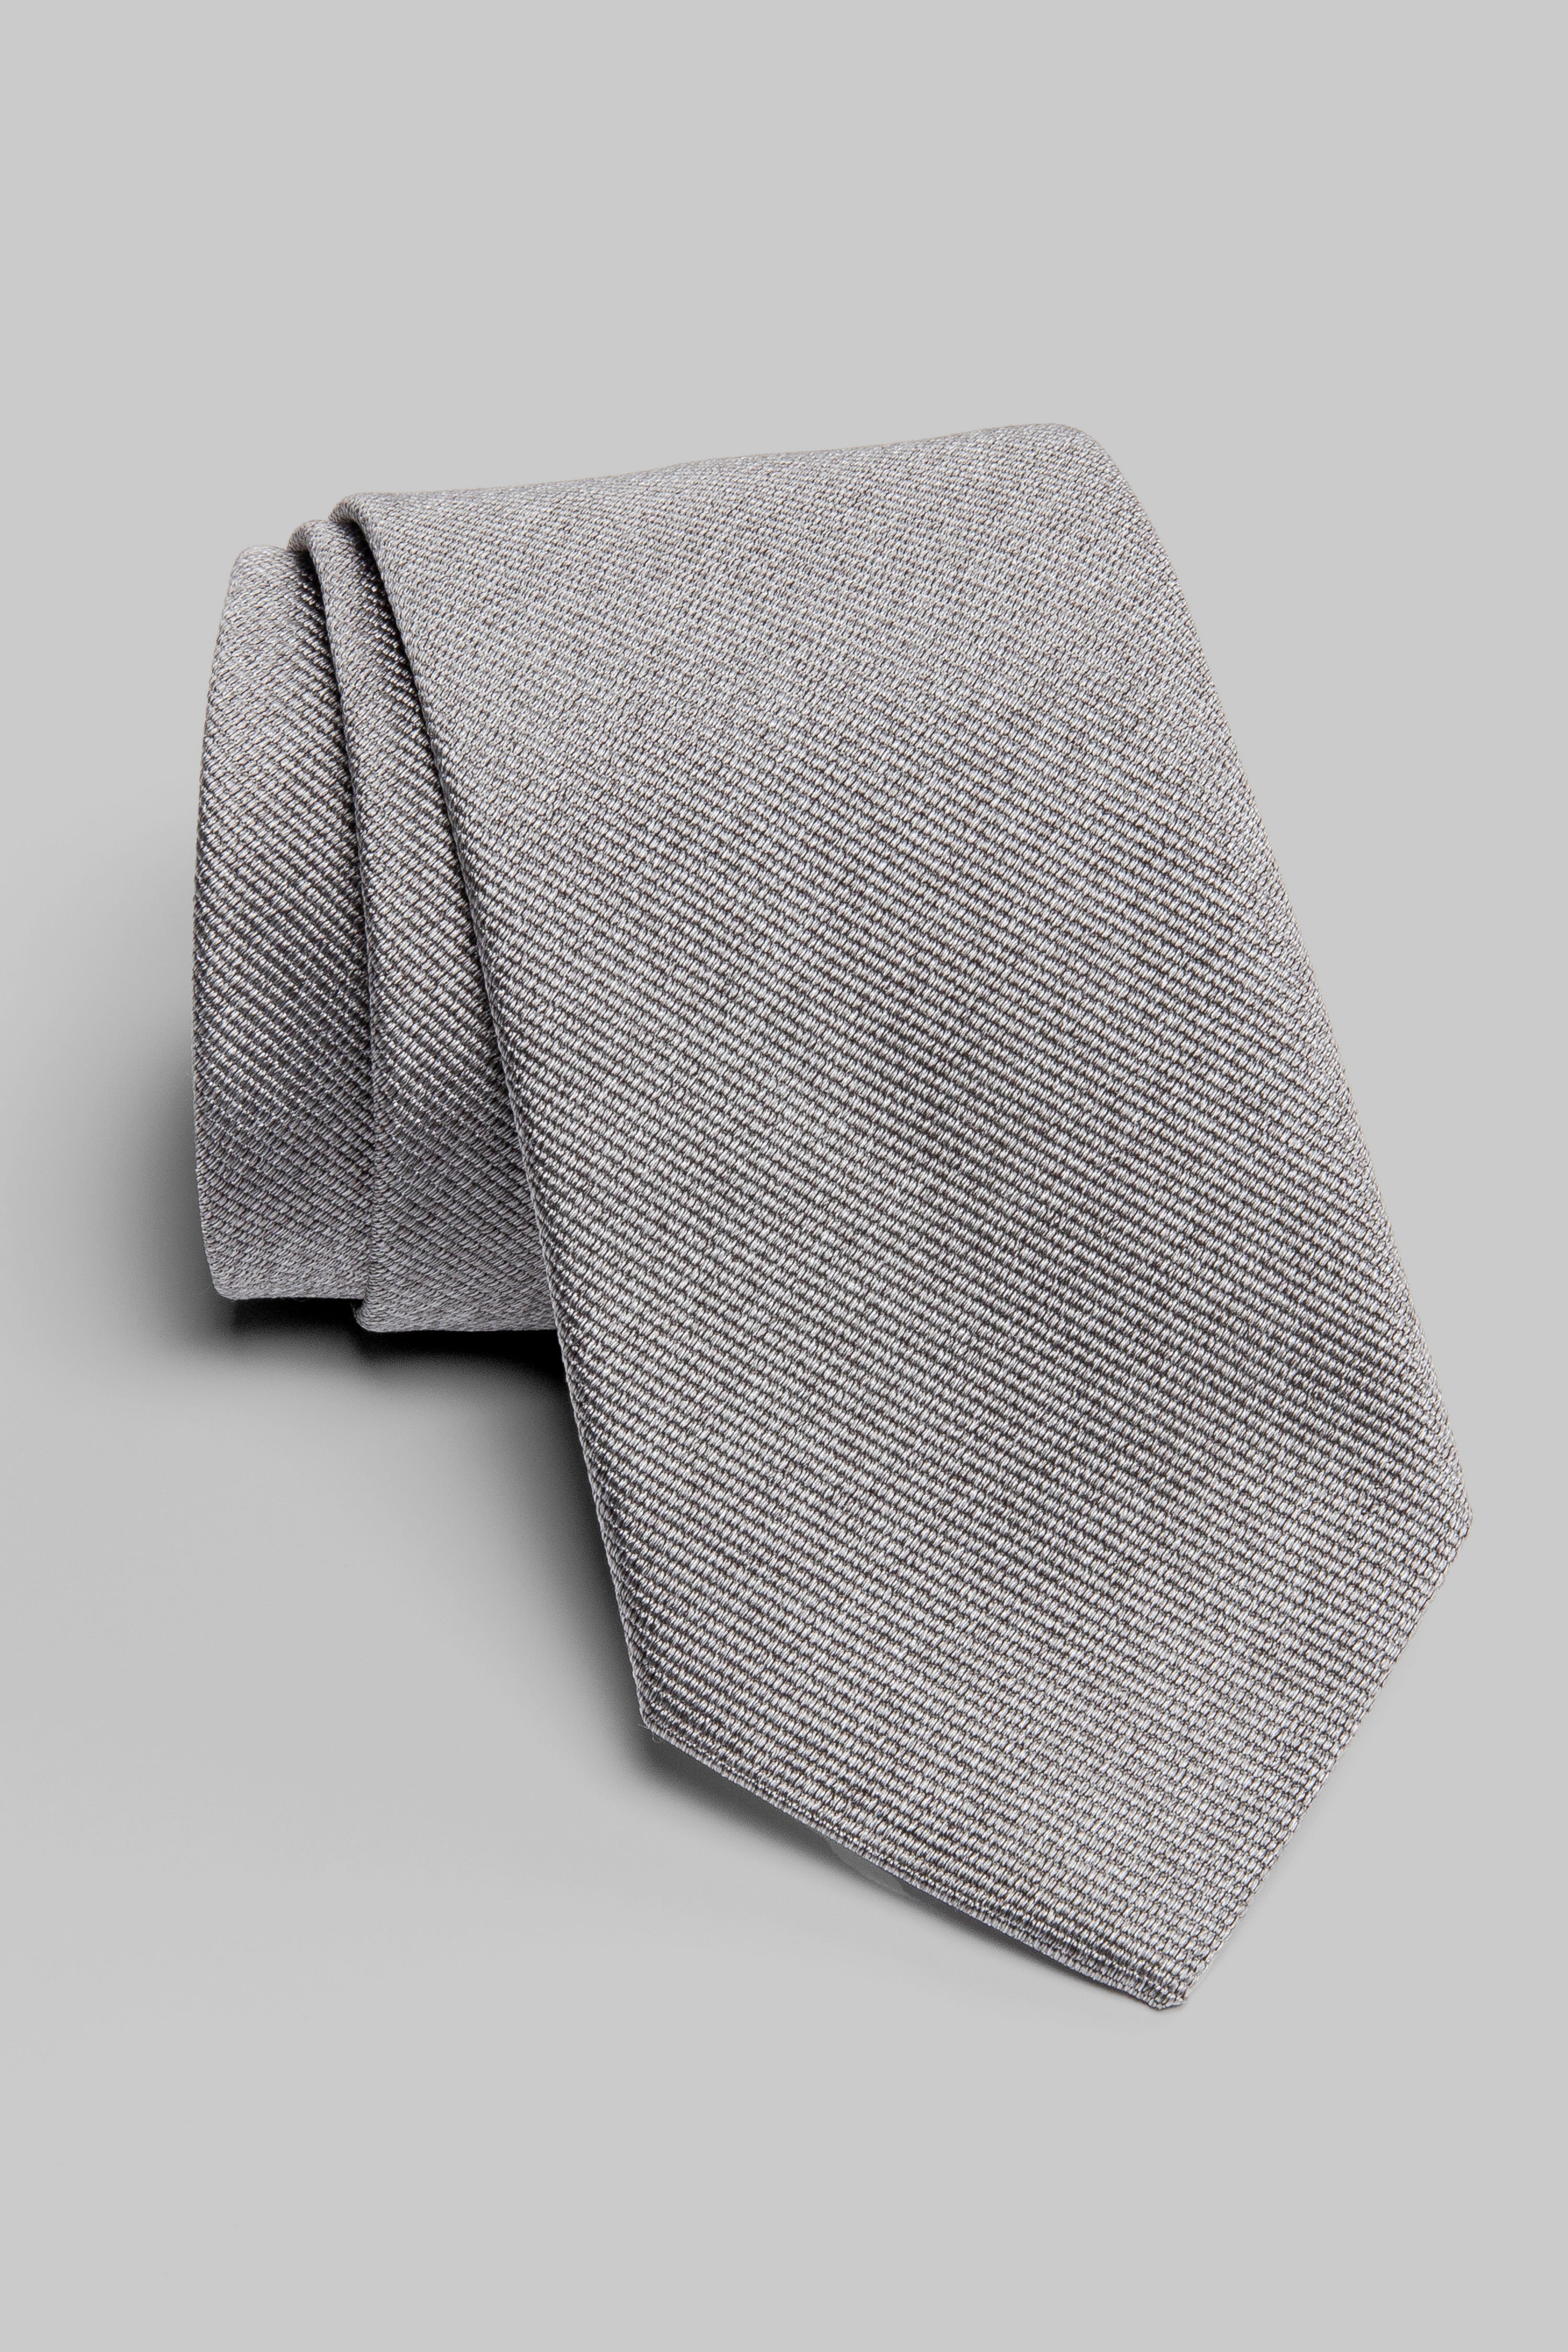 Alt view Bowman Solid Woven Tie in Grey